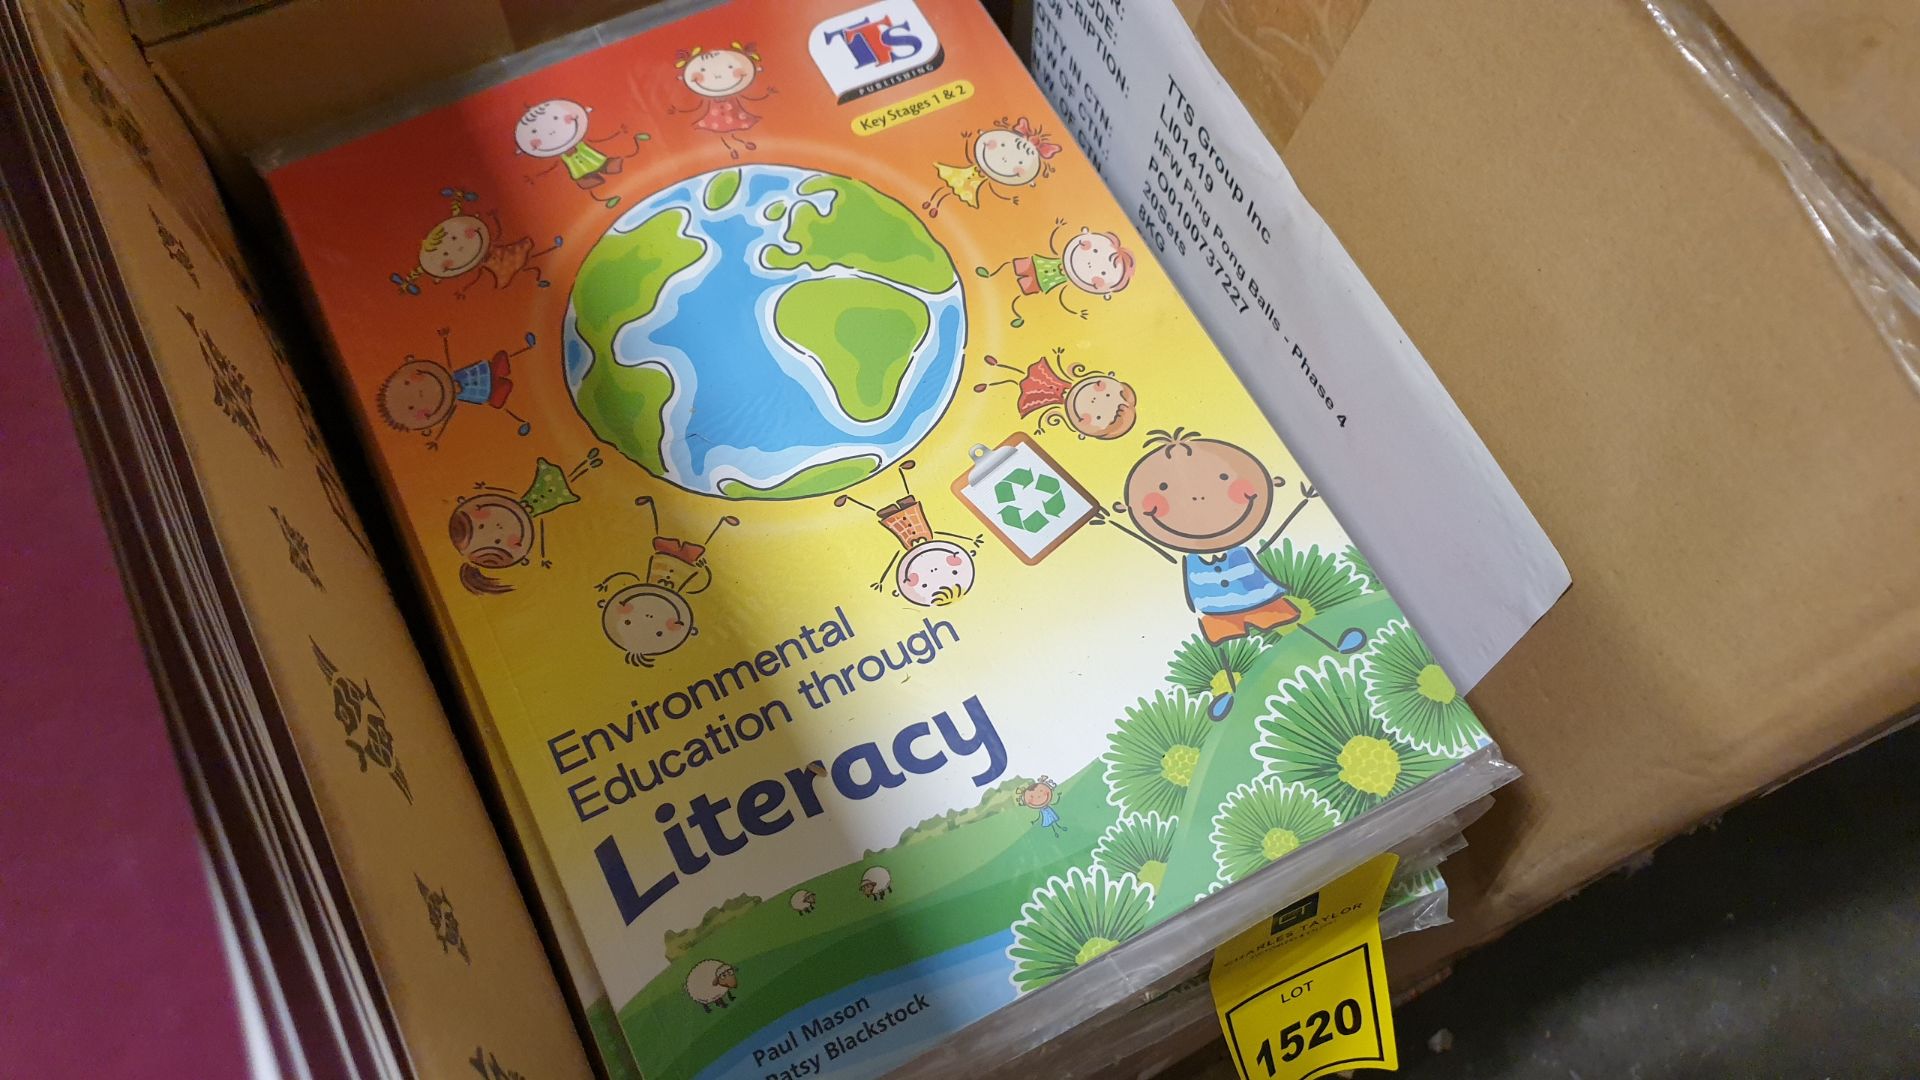 APPROX 200 X BRAND NEW COPIES OF ENVIRONMENTAL EDUCATION THROUGH LITERACY PUBLICATIONS - IN 3